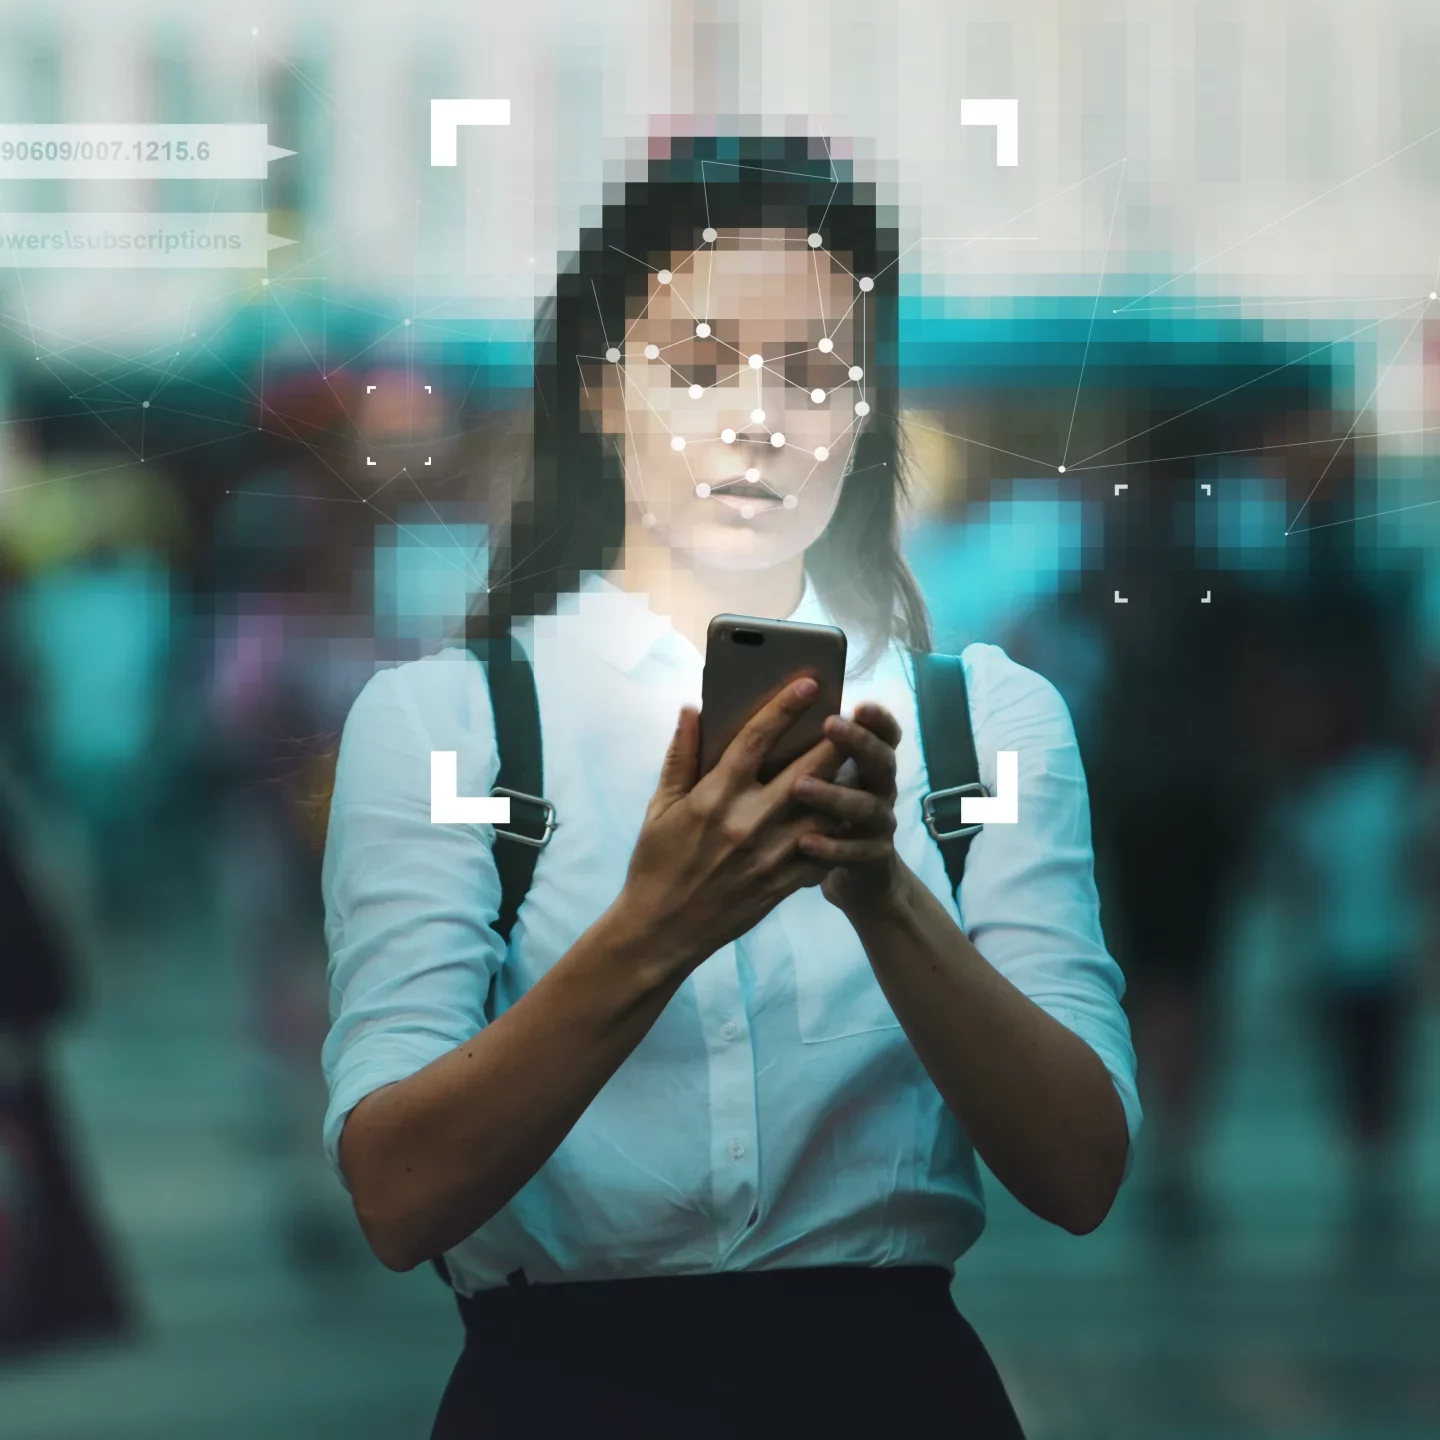 An illustrative photo of a woman with a cellphone to show Identification and privacy in context of modern digital technologies.